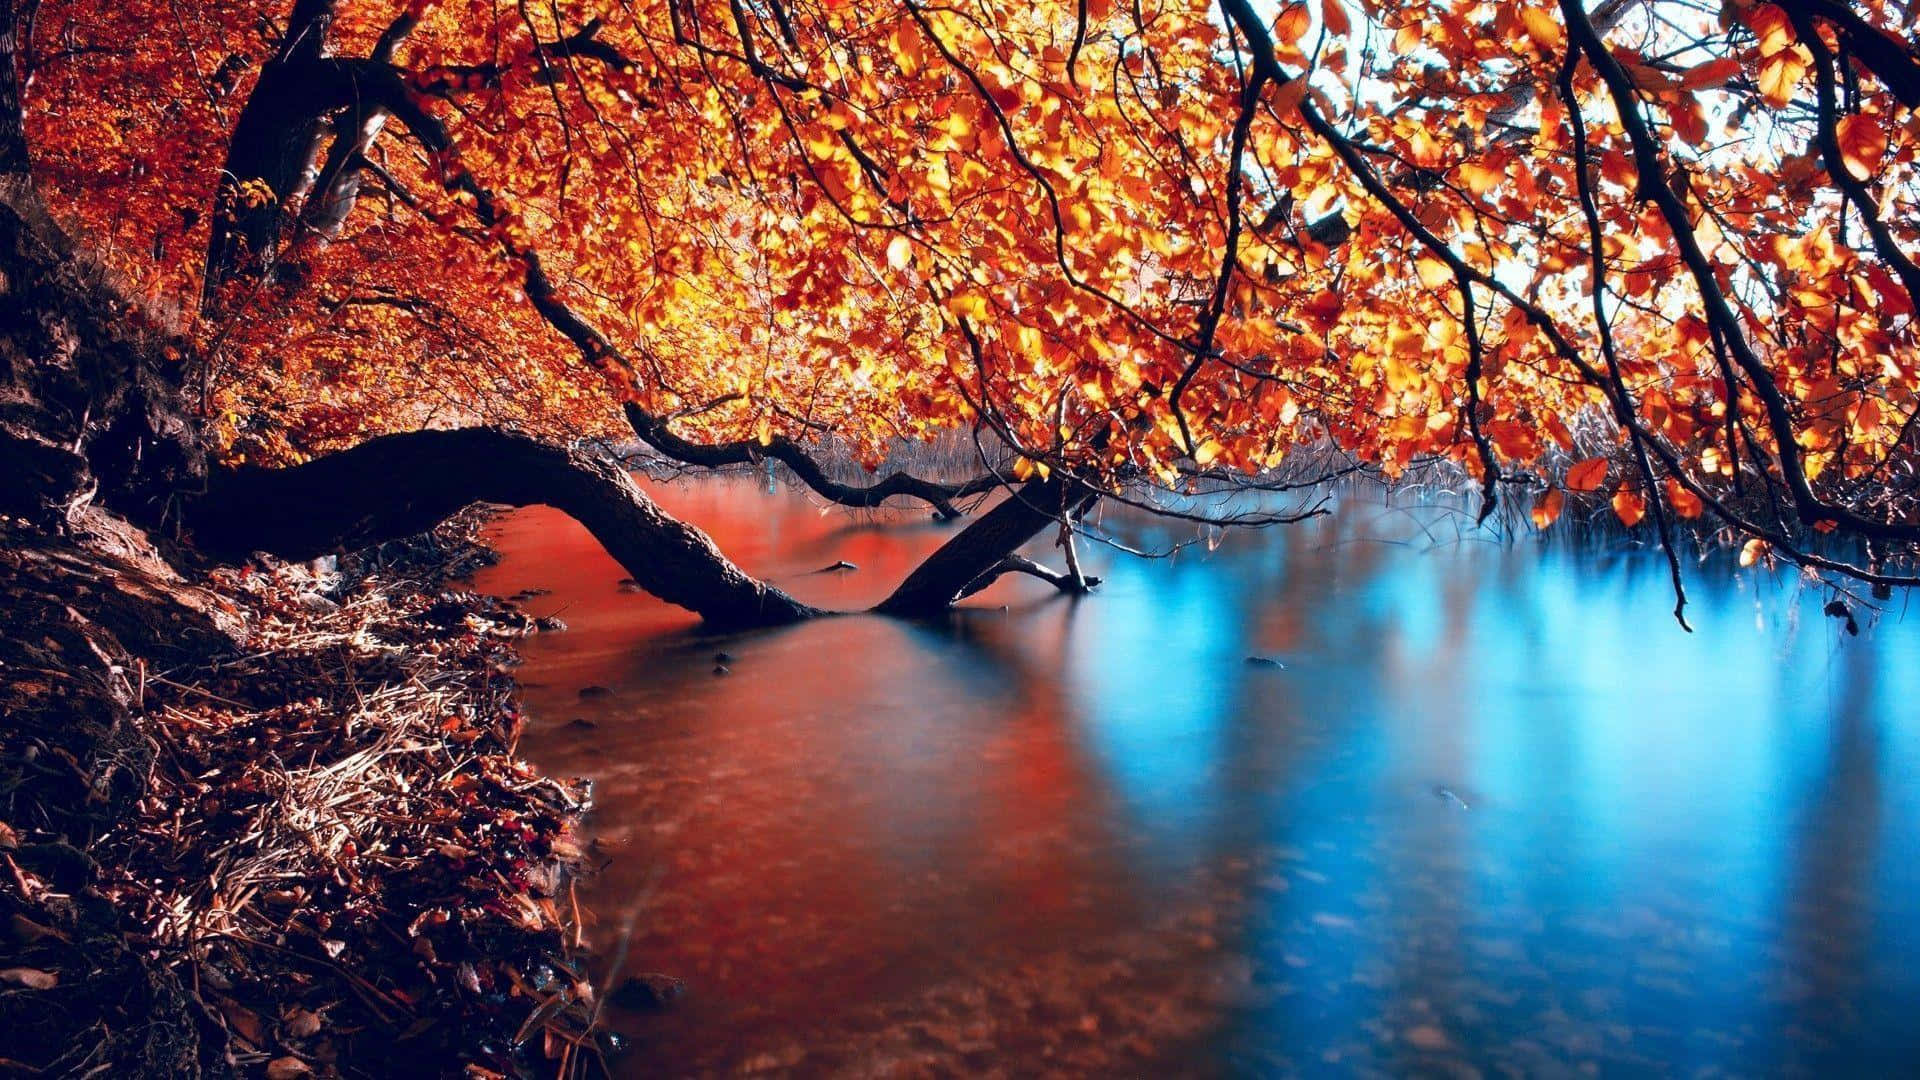 Stunning Autumn Scenery in the Forest